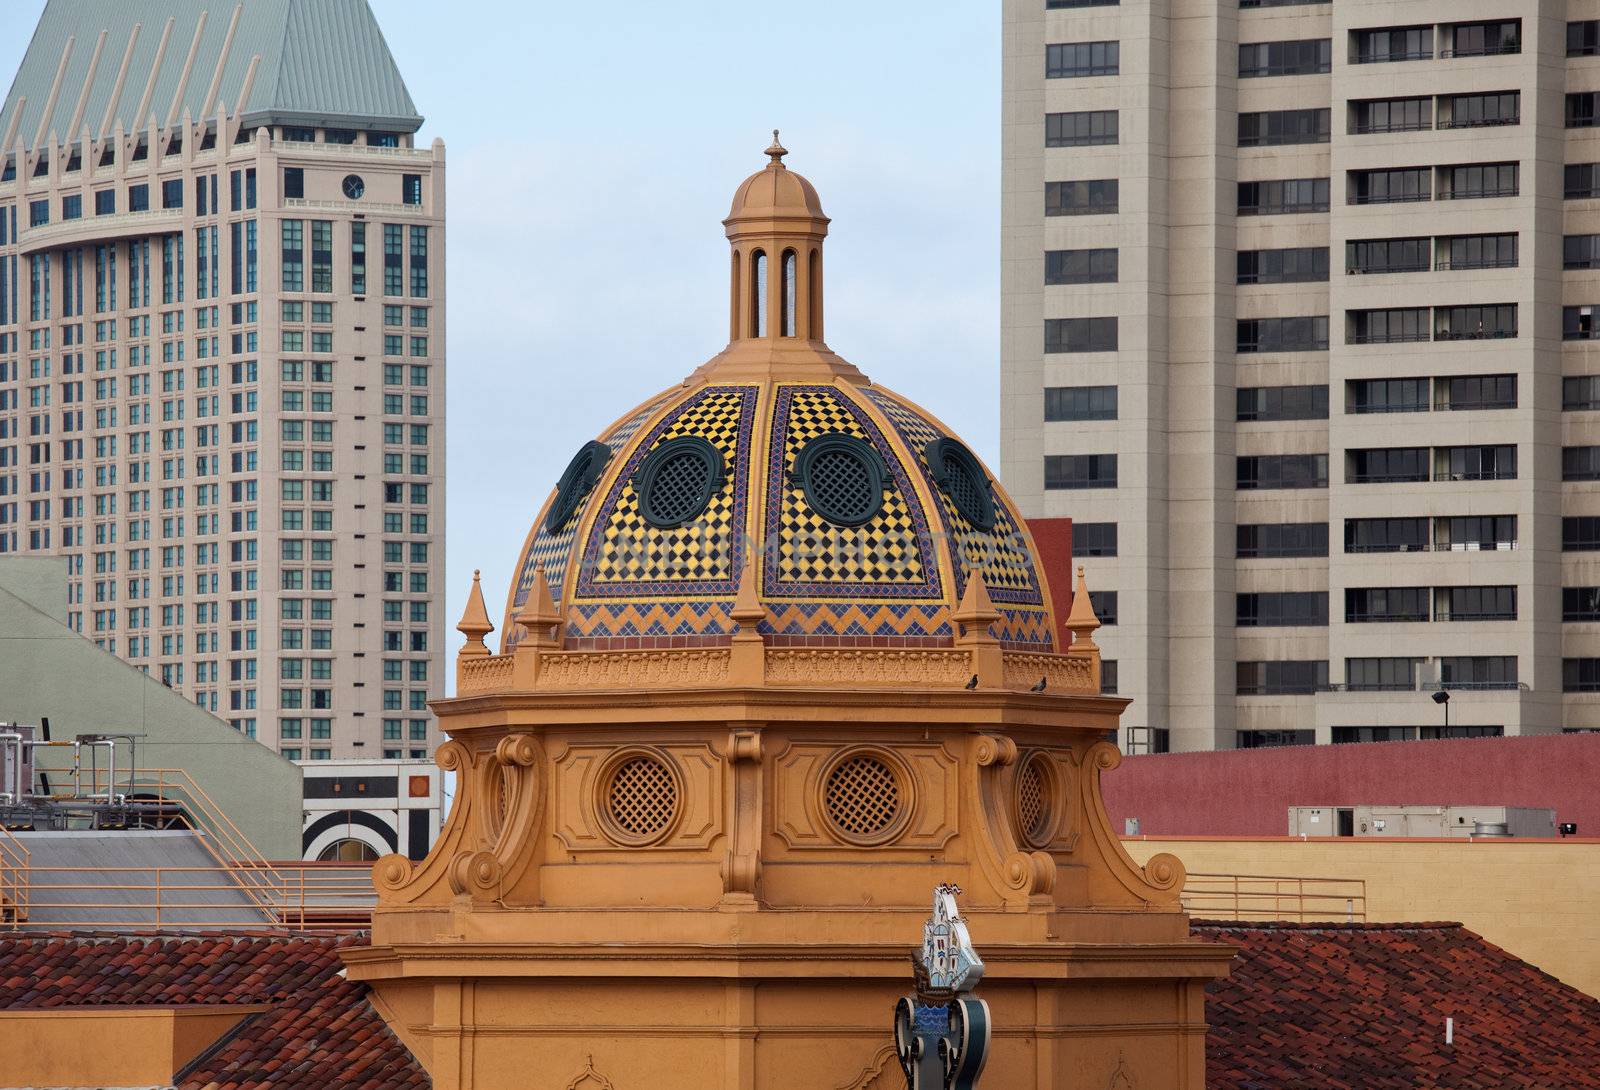 Gaslamp district of San Diego with am ornate tower roof dome by modern skyscrapers